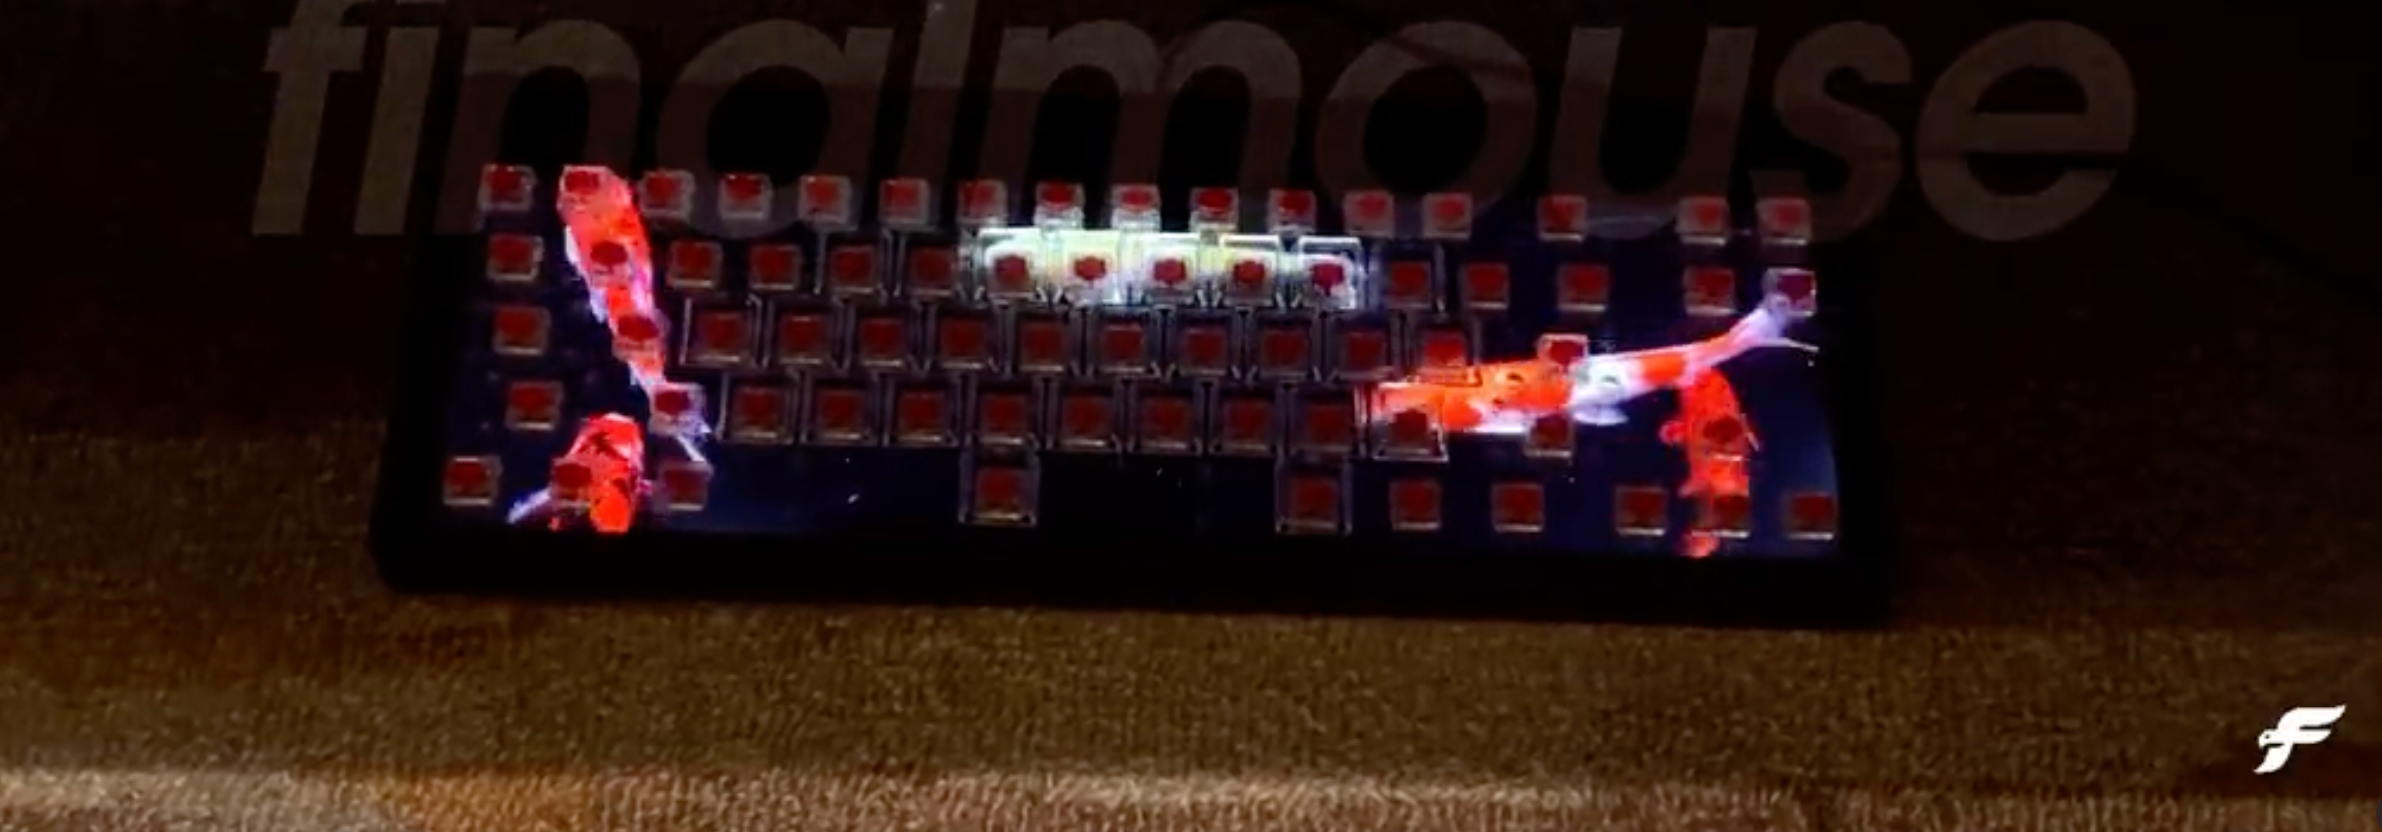 Finalmouse keyboard with a display showing off fully moving graphics 